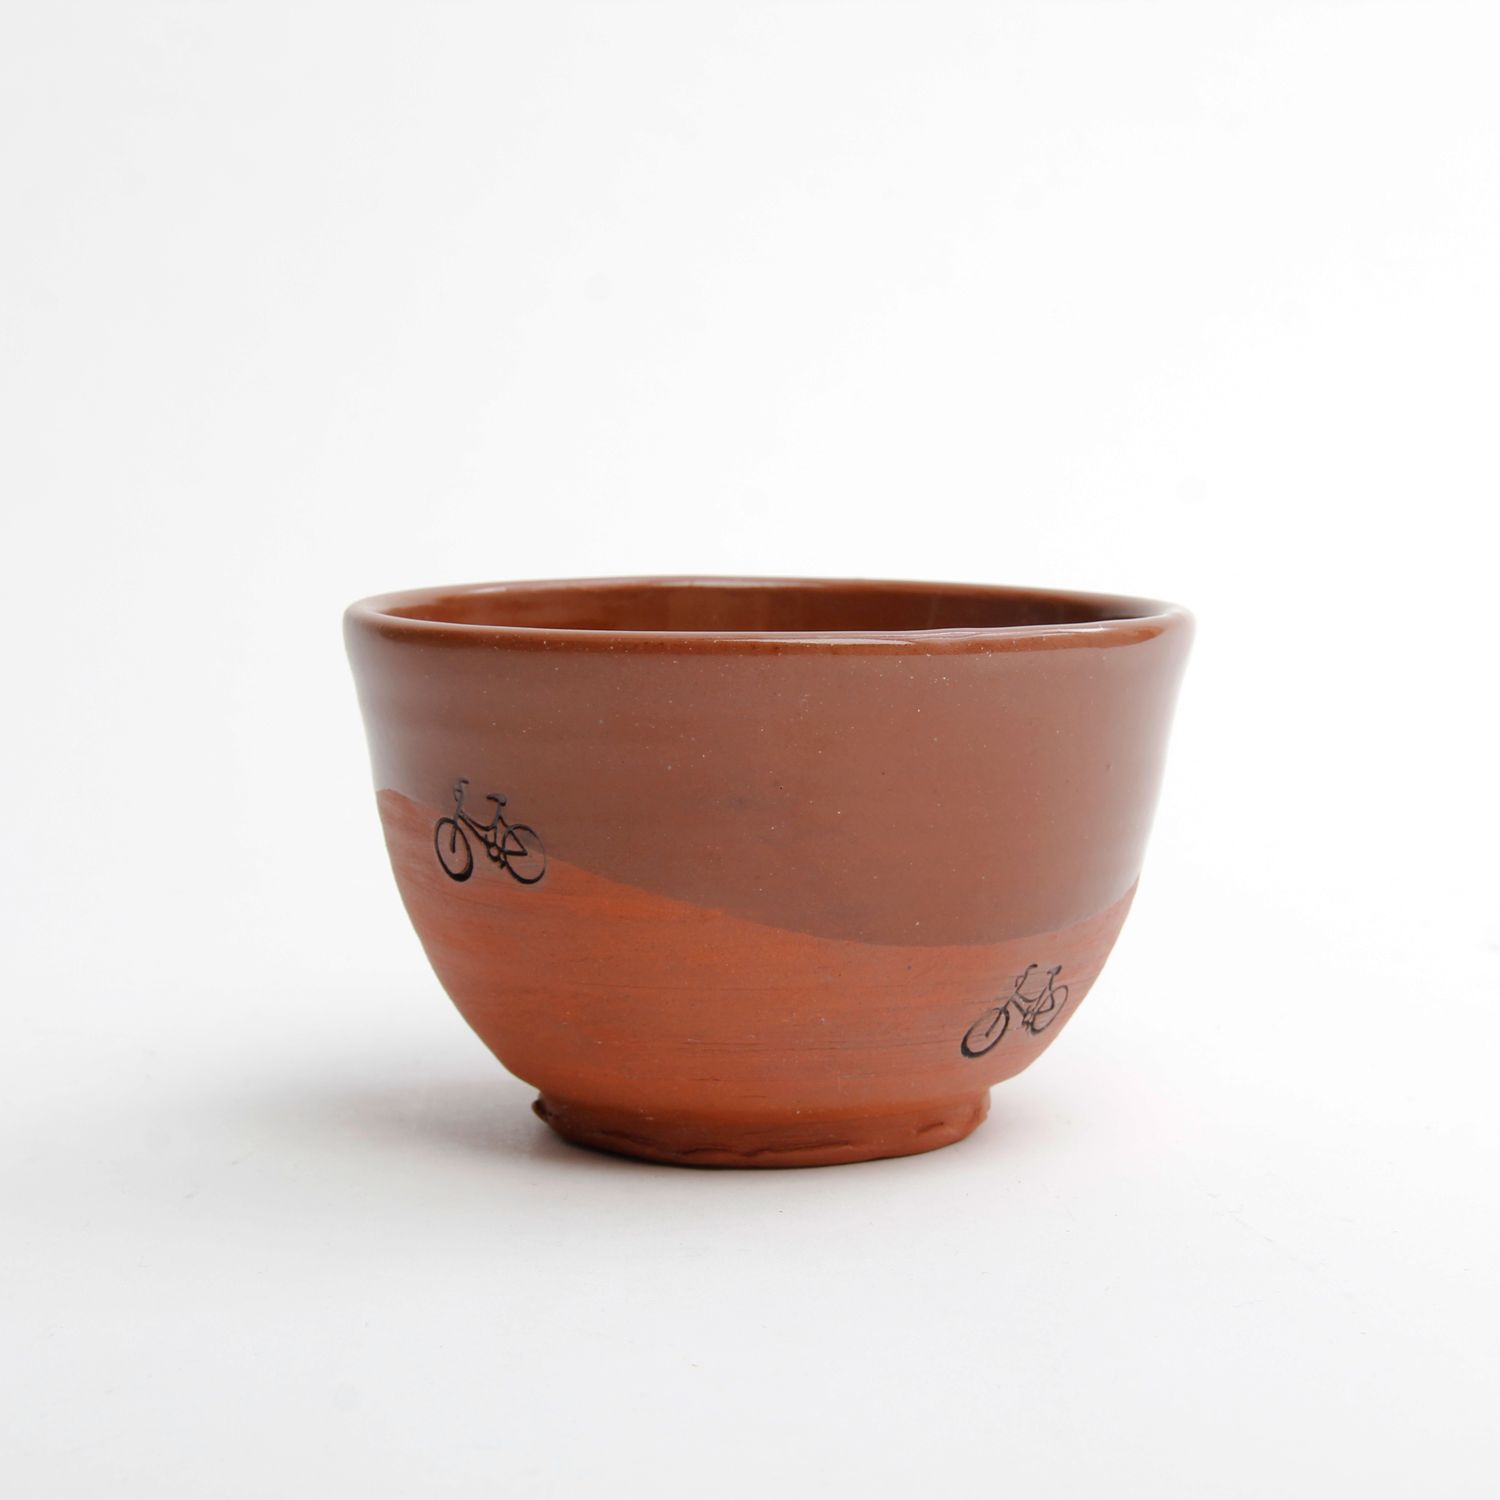 Mary McKenzie: Bicycle Bowl Brown Product Image 1 of 3